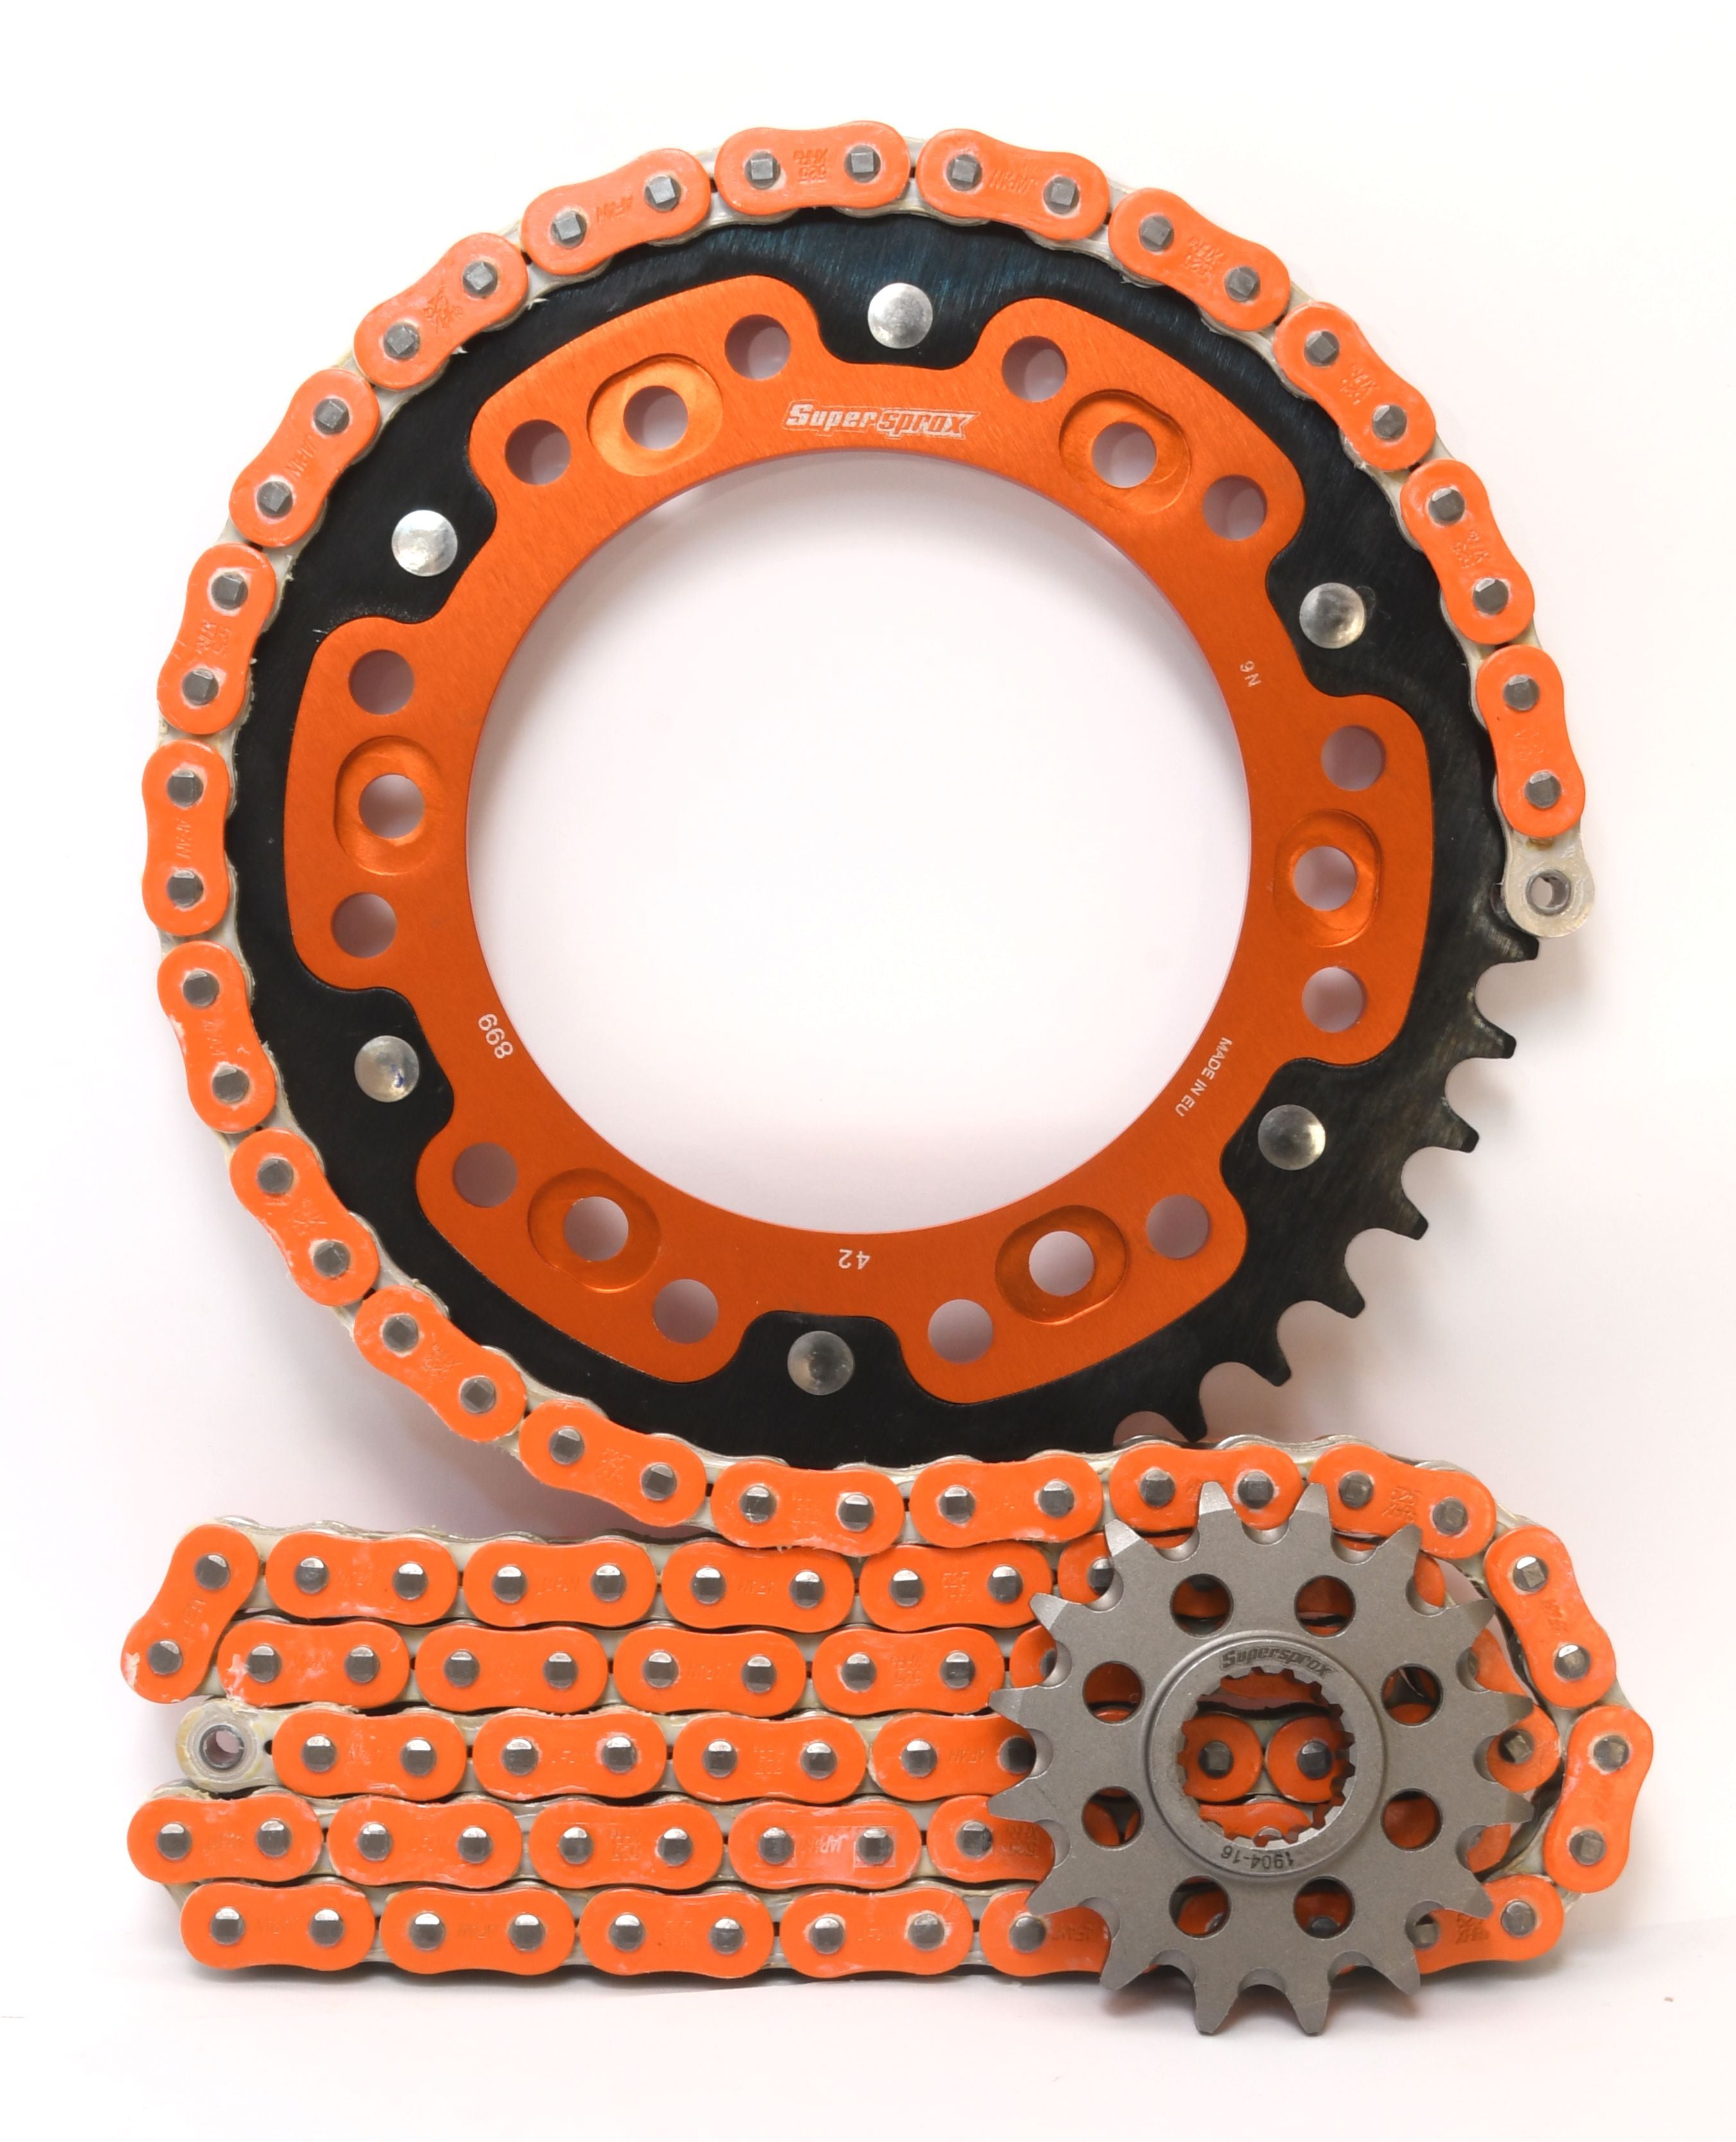 Supersprox Chain & Sprocket Kit for KTM Adventure - Choose Your Gearing - 0